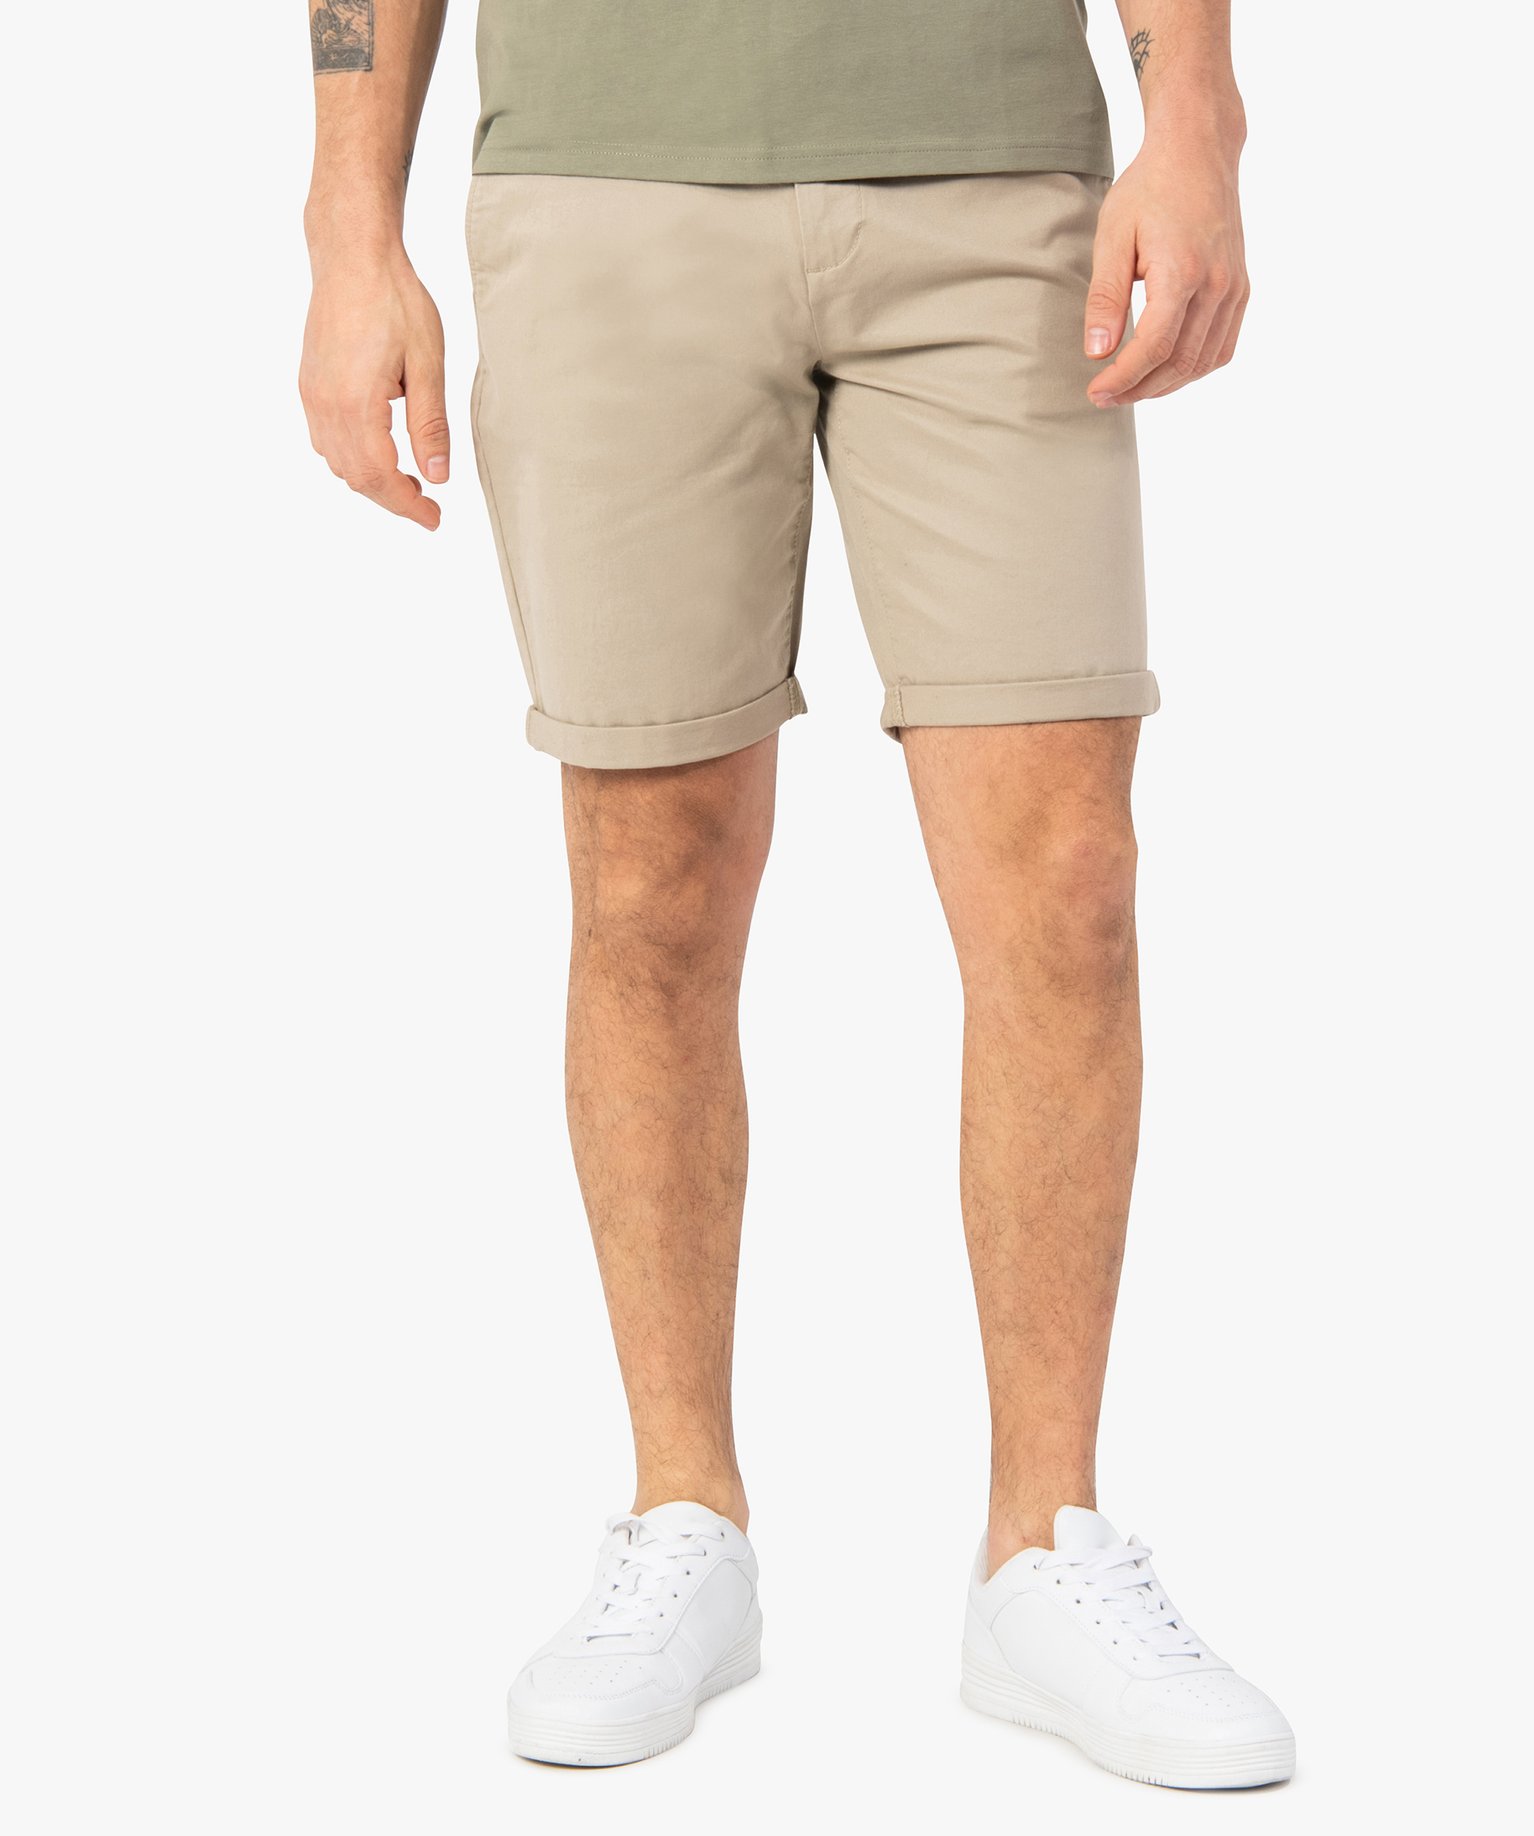 bermuda homme en toile unie 5 poches coupe chino beige